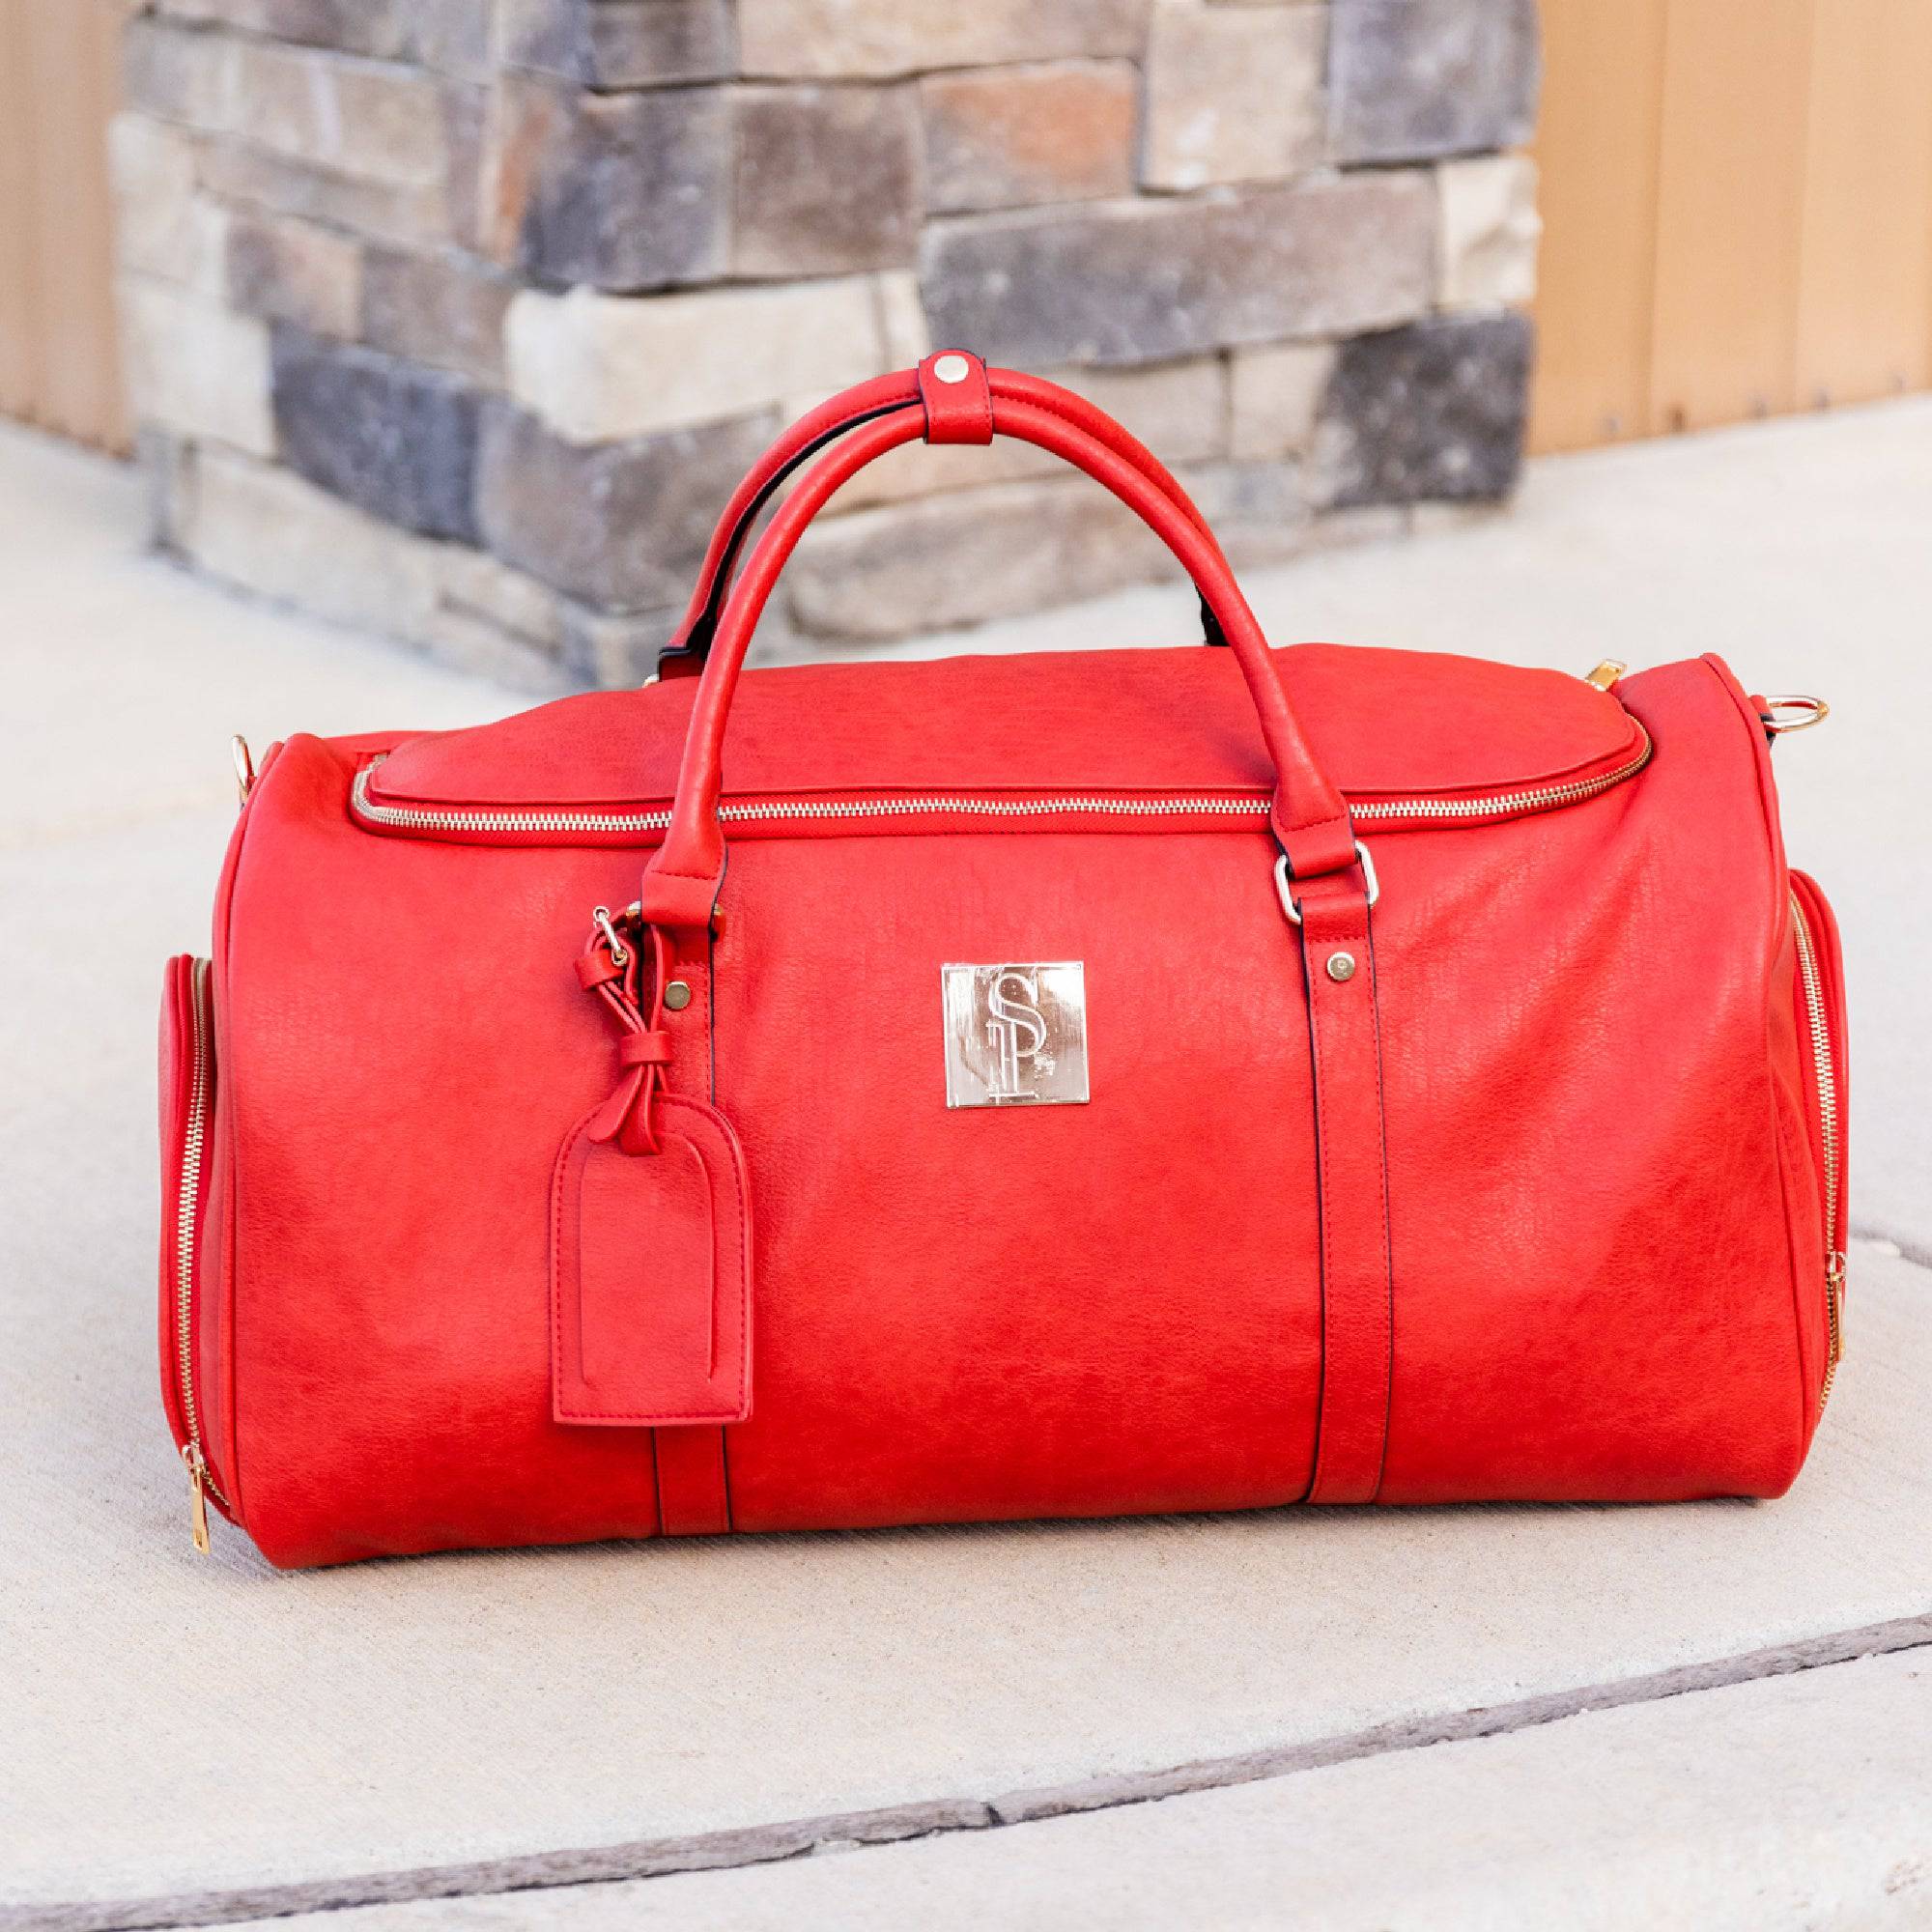 Red Duffle Bag front